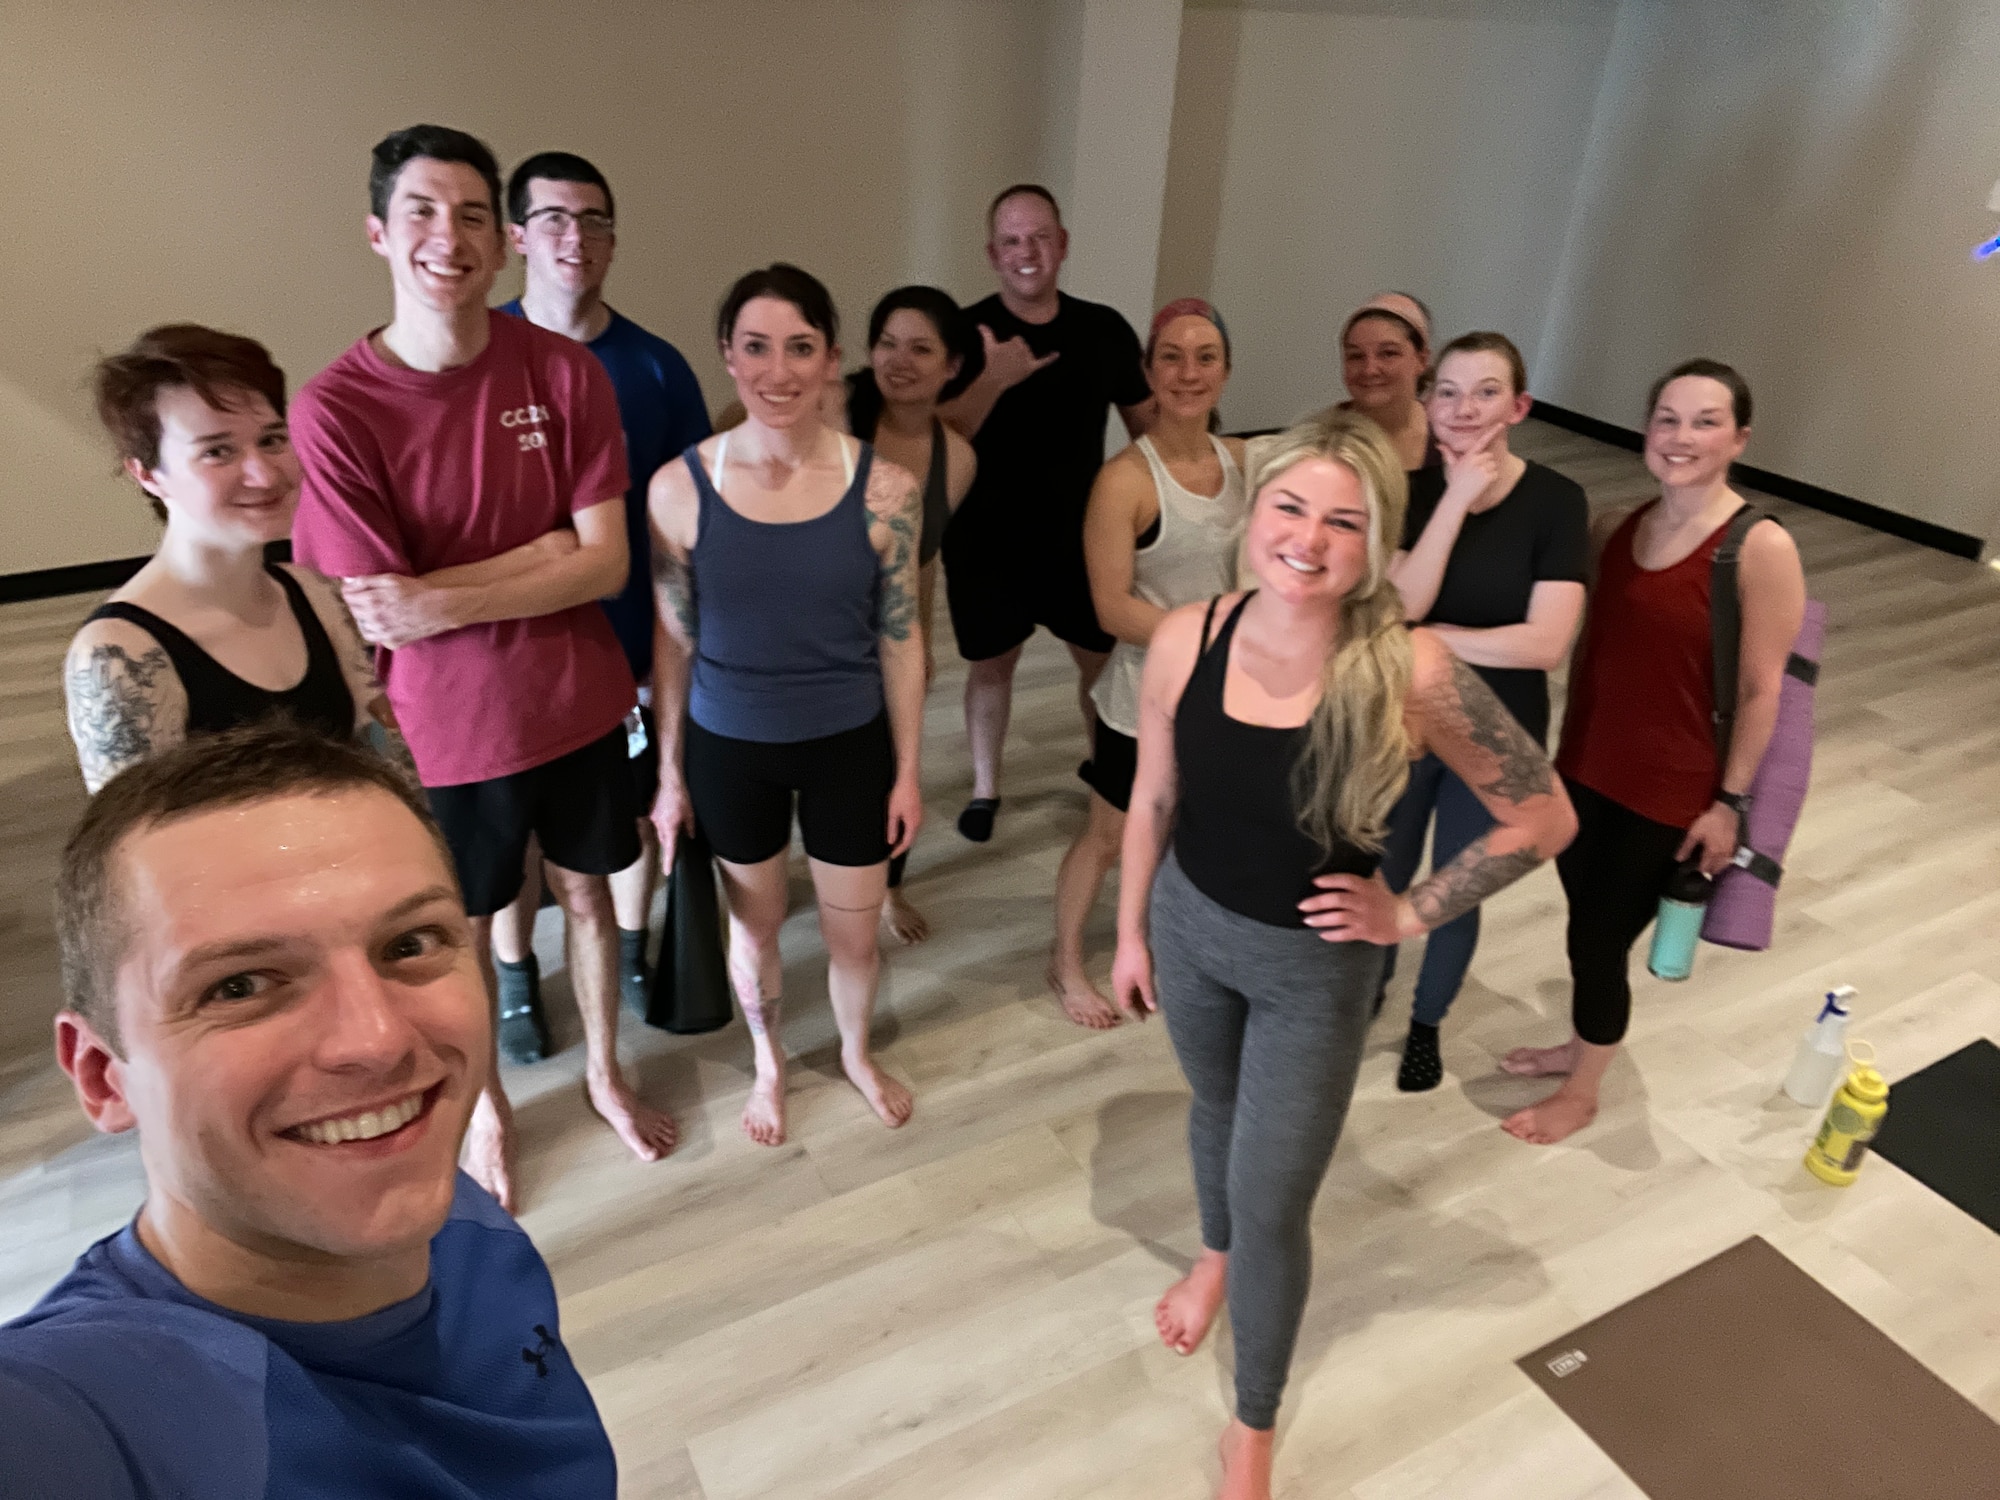 A man in a blue shirt takes a selfie with other people in a yoga studio.